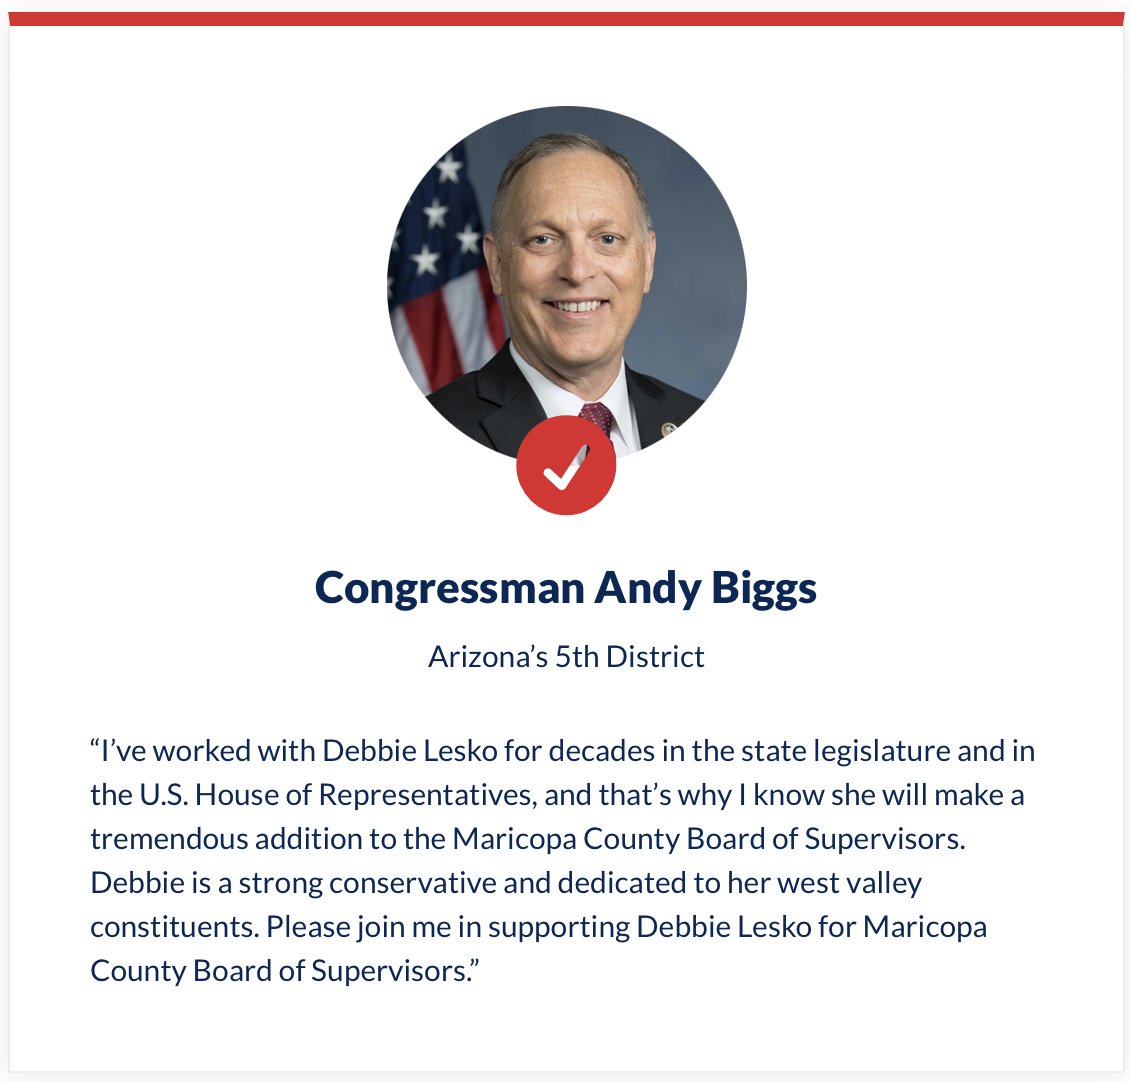 ICYMI: My friend and colleague @andybiggs4az endorsed me to be the next Maricopa County Supervisor for District 4!